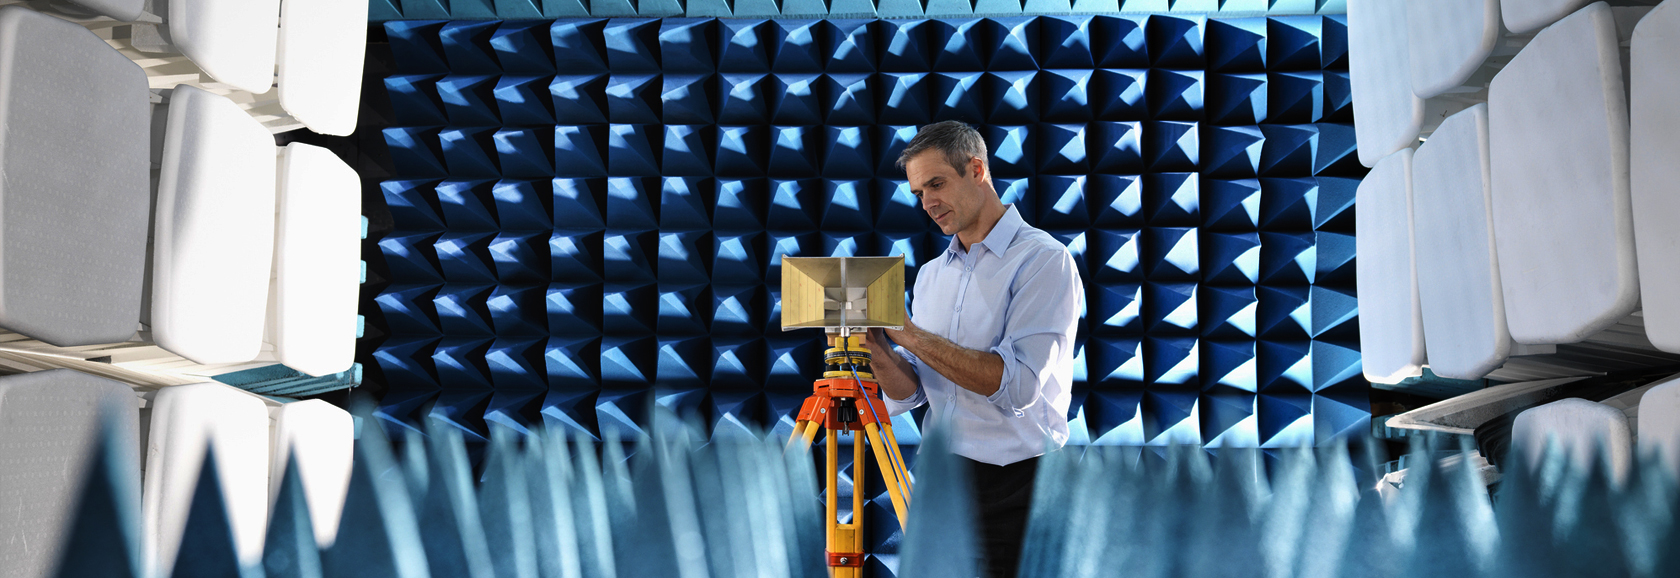 testing 4g and 5g antennas in anechoic chamber